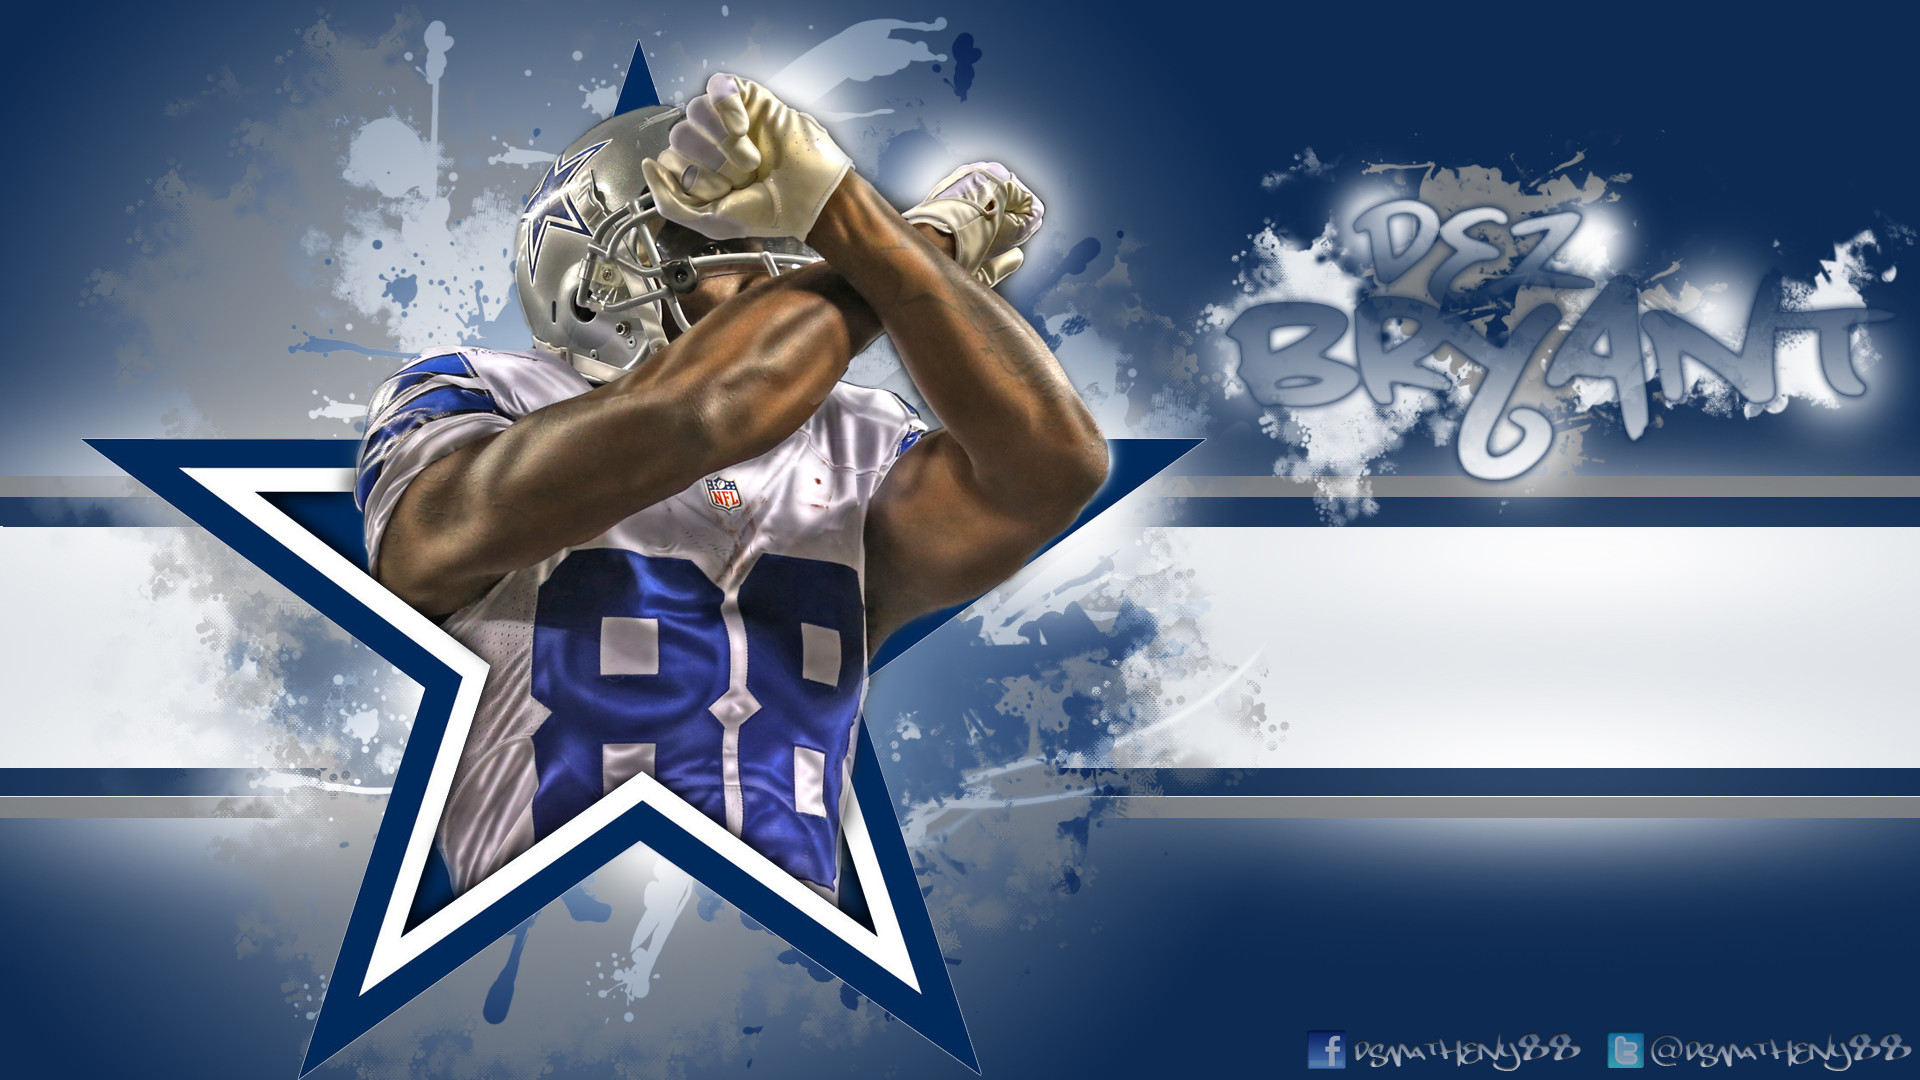 1920x1080 Dallas Cowboys Logo Wallpaper Tablet.Download this wallpaper for all screen  sizes here – http://wickedwallz.blogspot.com